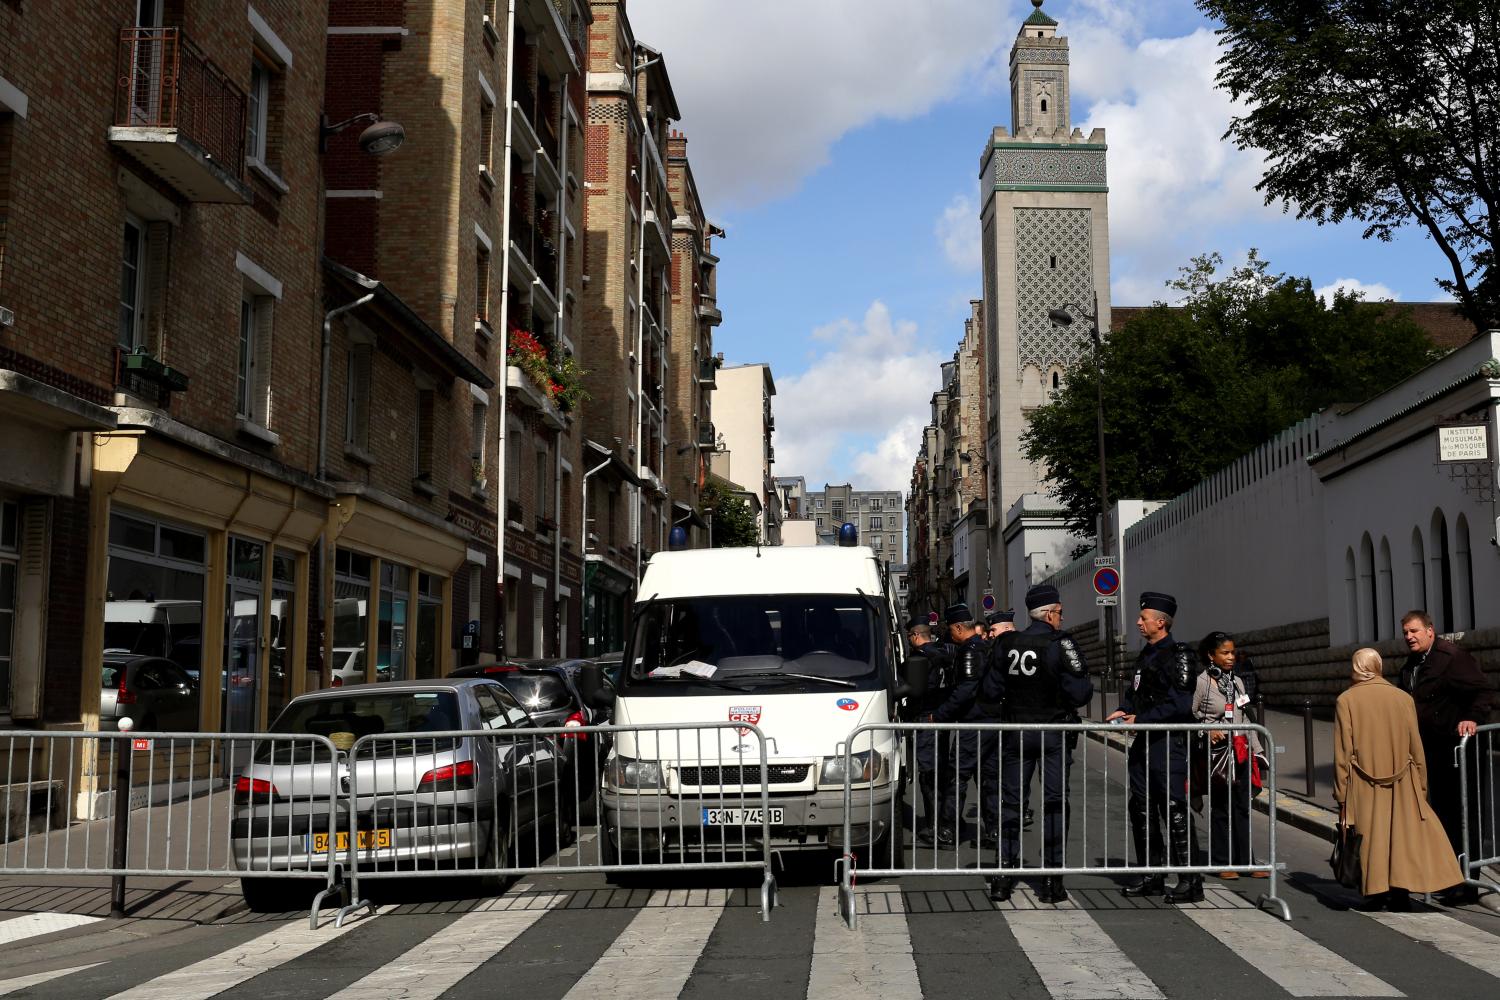 Anti-riot policemen stand in front of the Mosque, as police was deployed in several areas of the city to enforce a ban on protests over an anti-Islam film or against a French magazine that published cartoons mocking the Prophet Mohammed. France's Muslim leaders, on September 21, urged militants not to defy the ban on protests, as a security alert closed the France's embassies across the Islamic world, in Paris, France, on September 22, 2012. Photo by Stephane Lemouton/ABACAPRESS.COM.